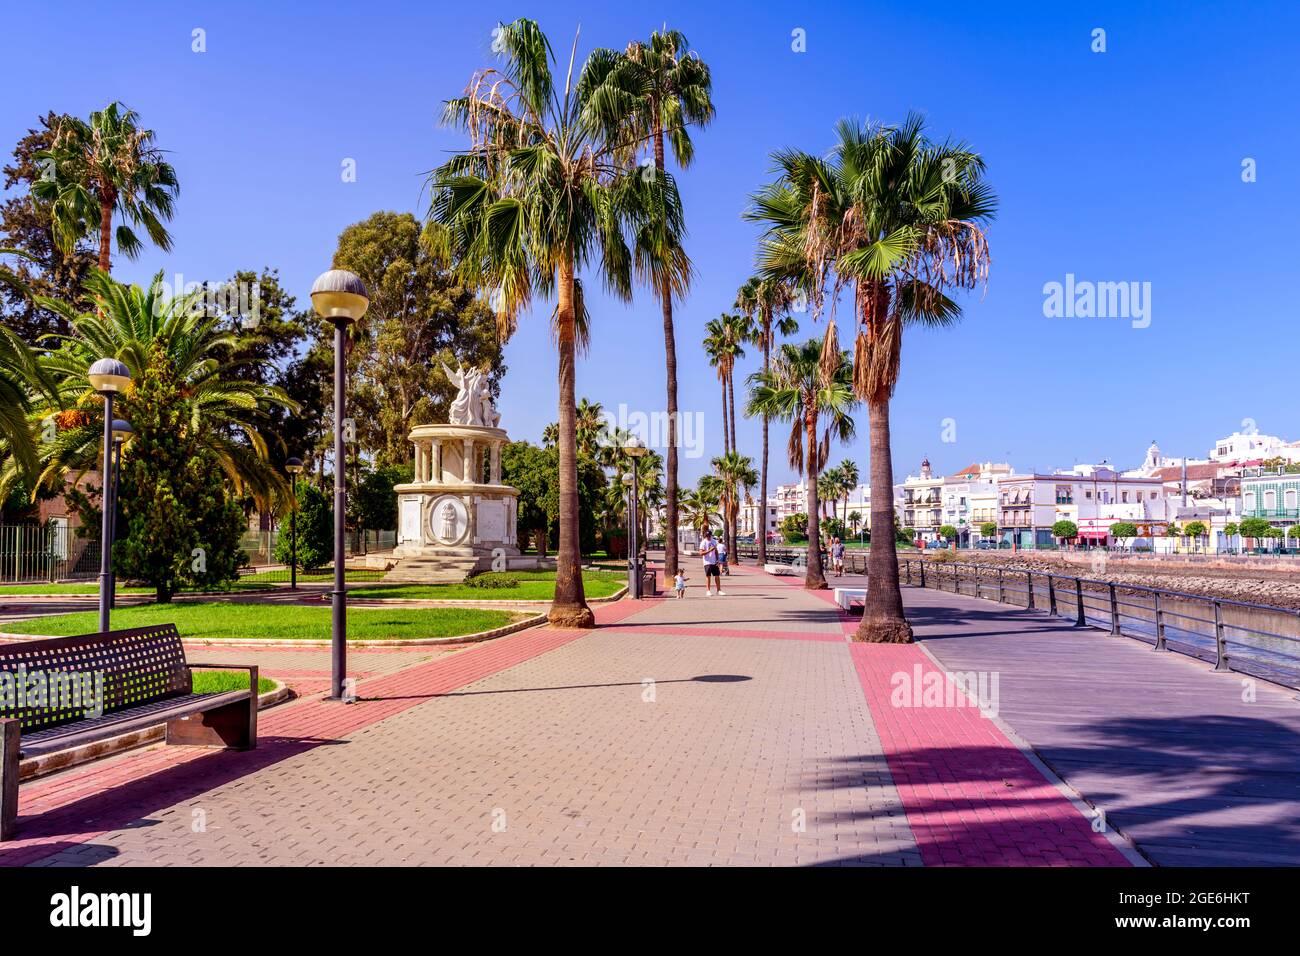 Ayamonte river side riverside walk in Navarro park municipal gardens. The monument to our lady of sorrows on the left. Ayamonte Huelva Spain Stock Photo